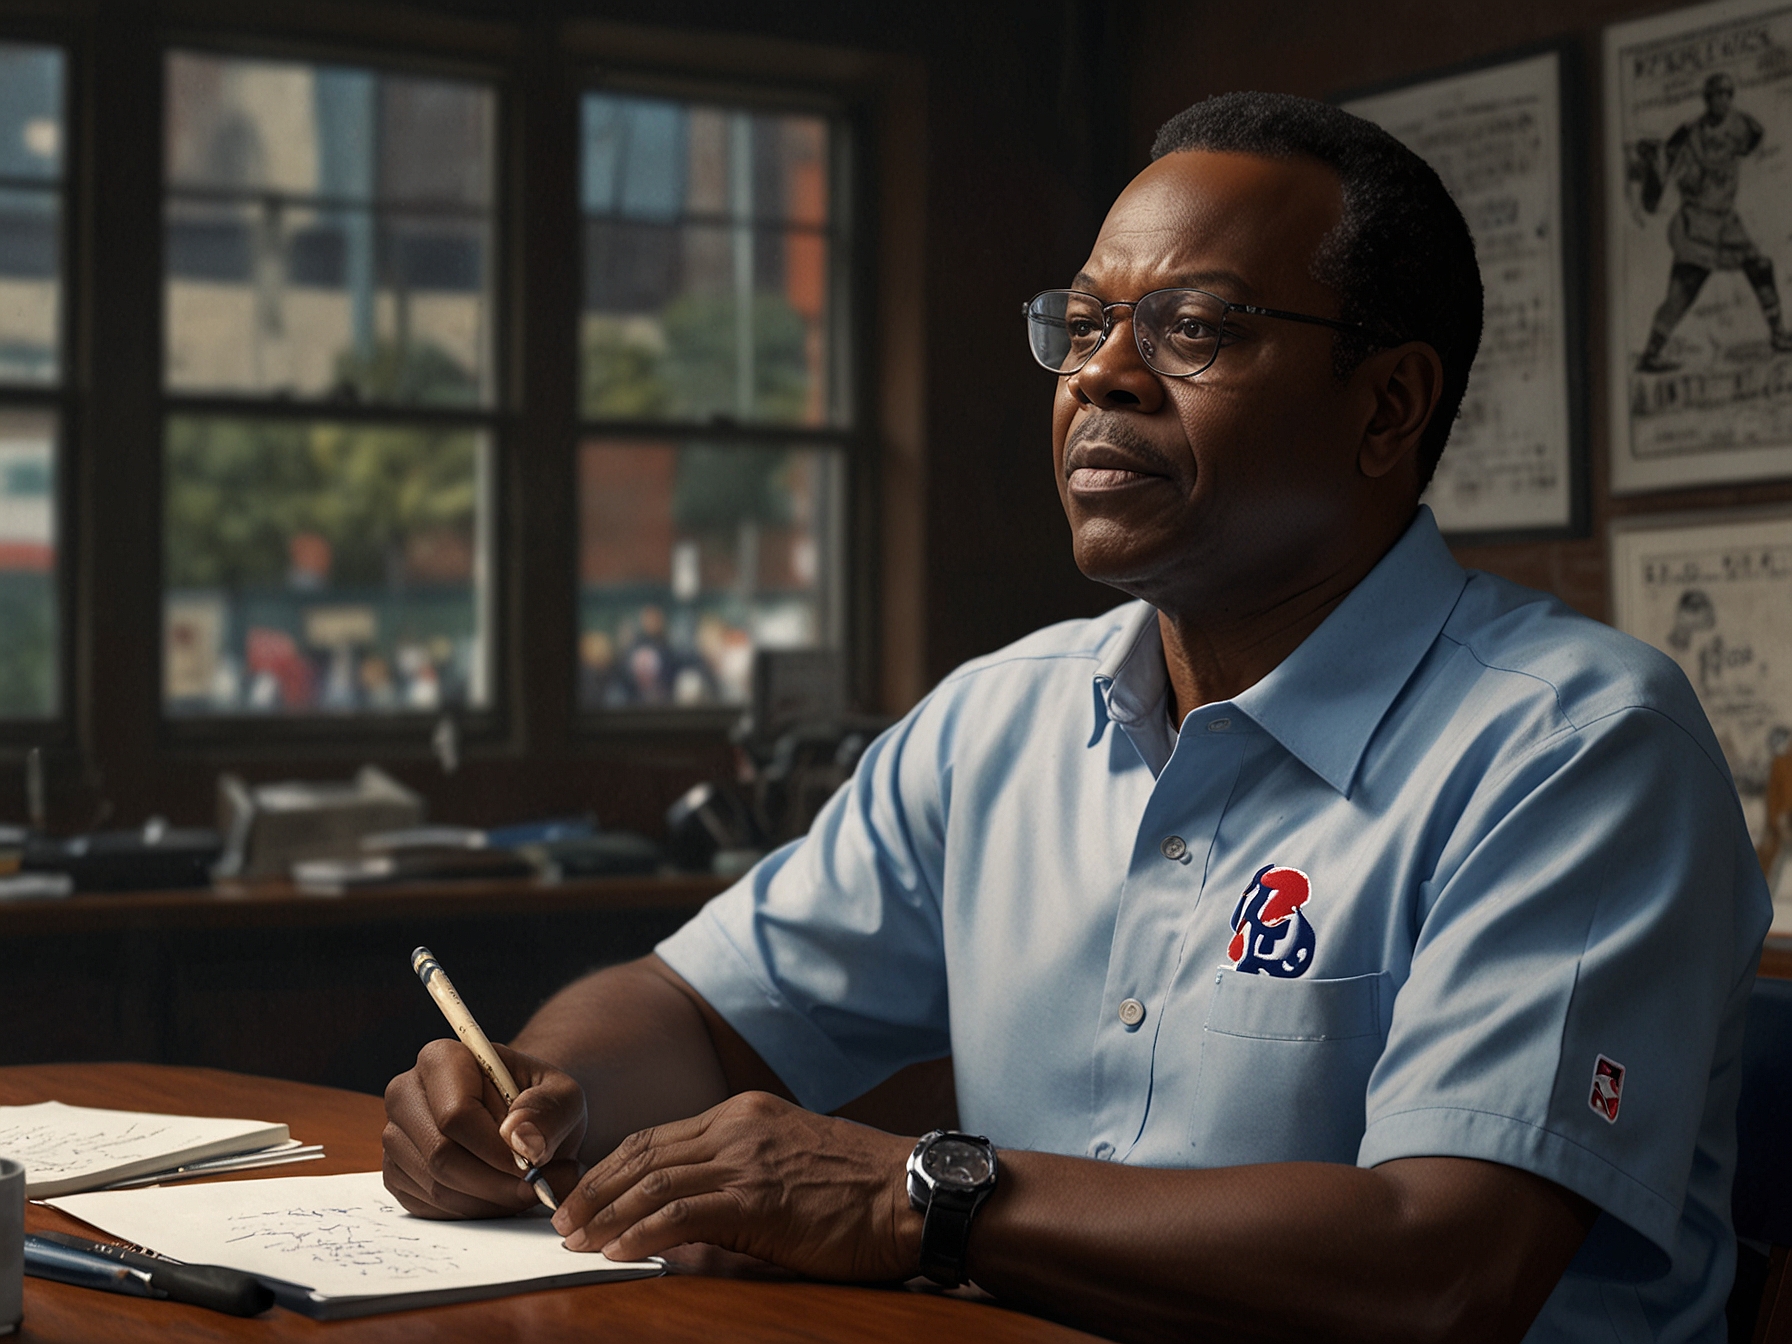 Reggie Jackson passionately recounts his experiences with racism during an emotional MLB on FOX segment, highlighting the challenges faced by African American athletes.